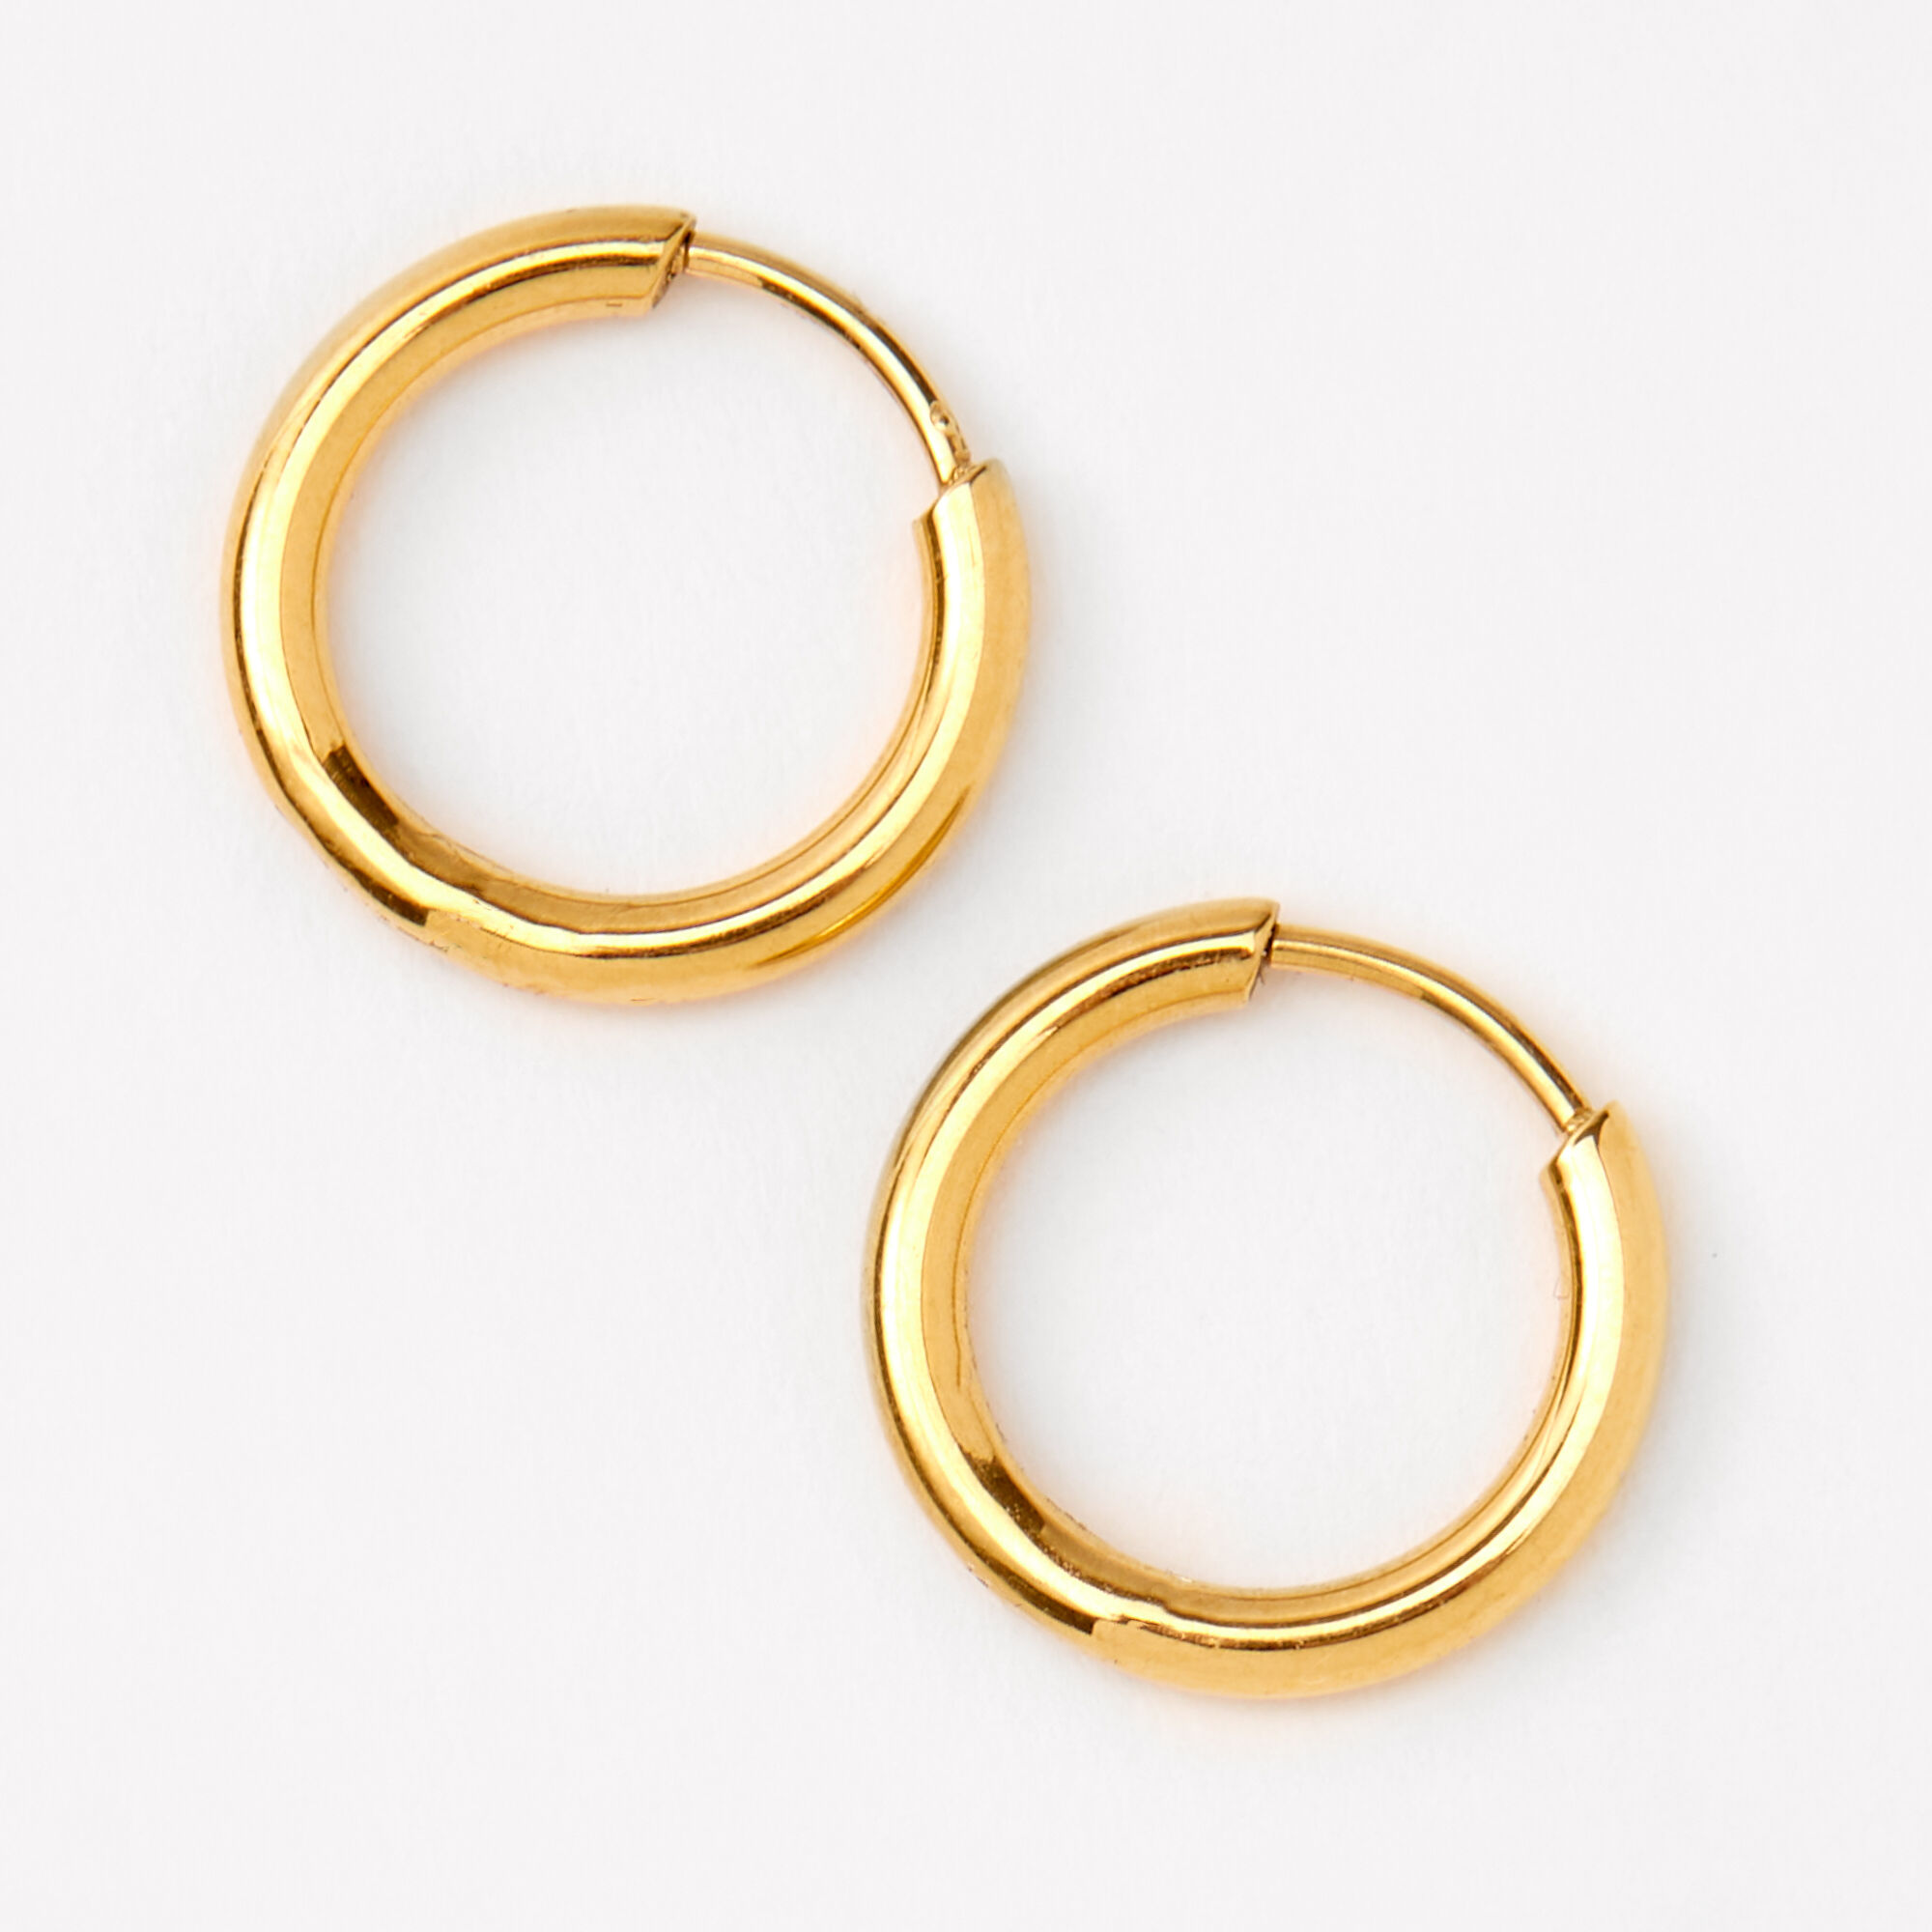 Amazon.com: Titanium Hoop Earrings Three Twist Hoops Earrings for Women 18K  Gold Plated, Fashion Unique Titanium Earrings Hoops Pure Titanium Ear Post  Hypoallergenic for Sensitive Ear: Clothing, Shoes & Jewelry